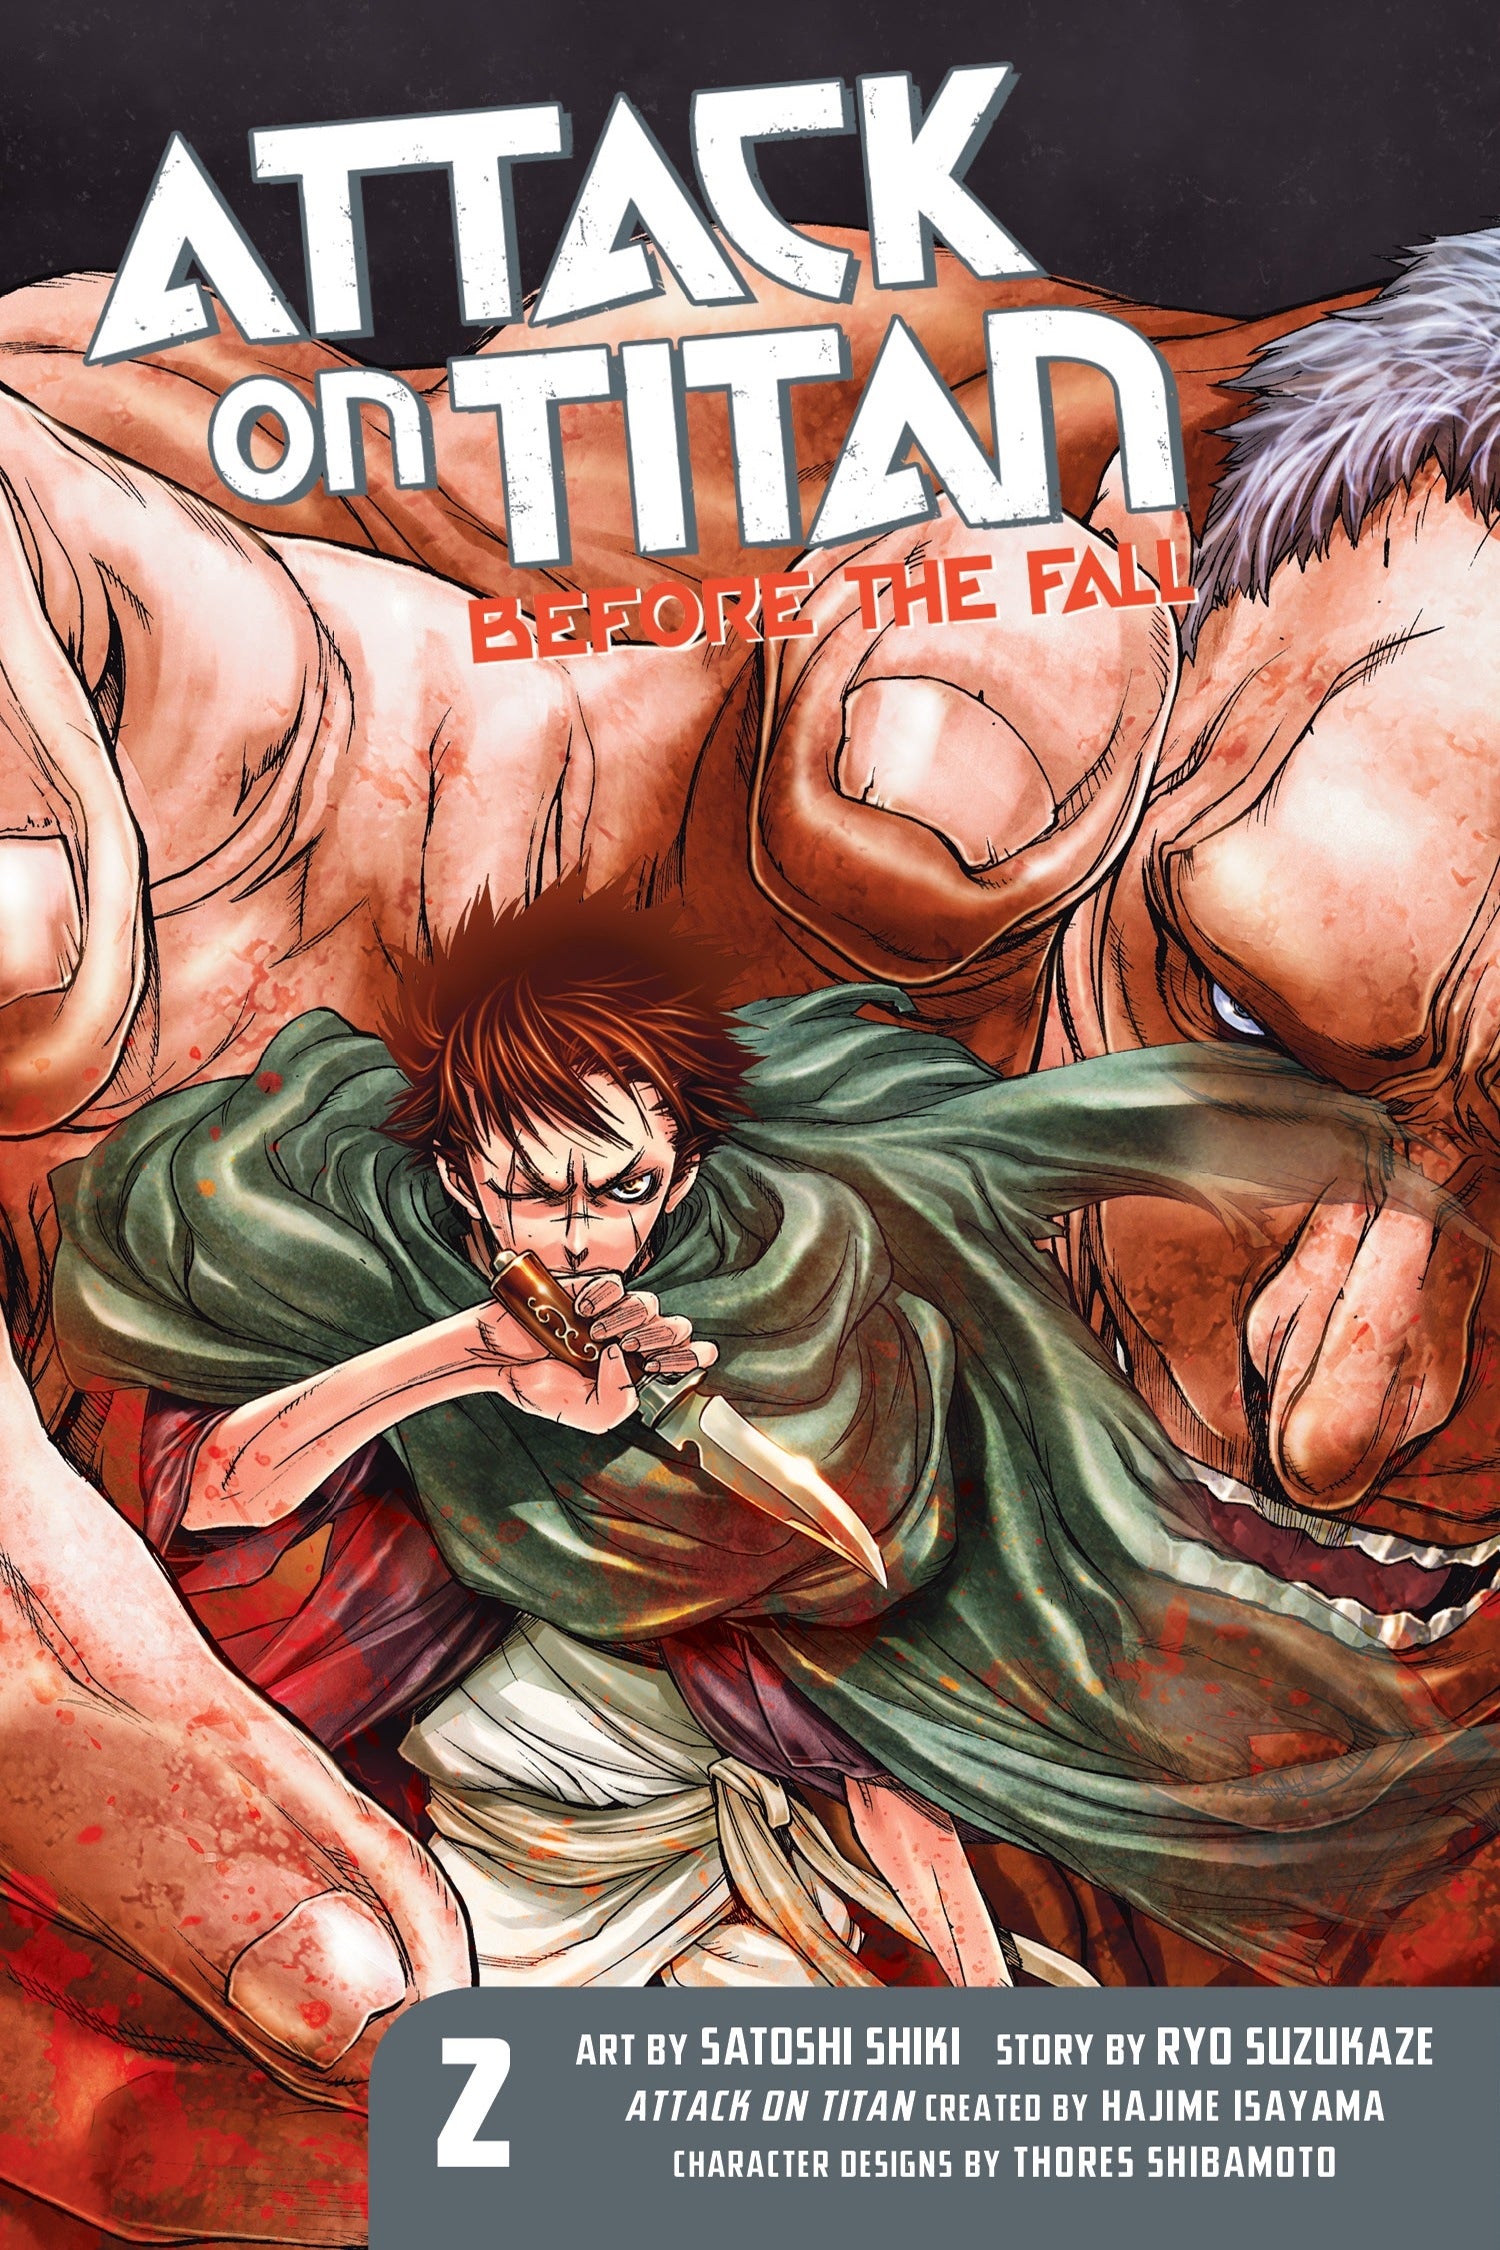 Attack on Titan Before the Fall, Vol. 2